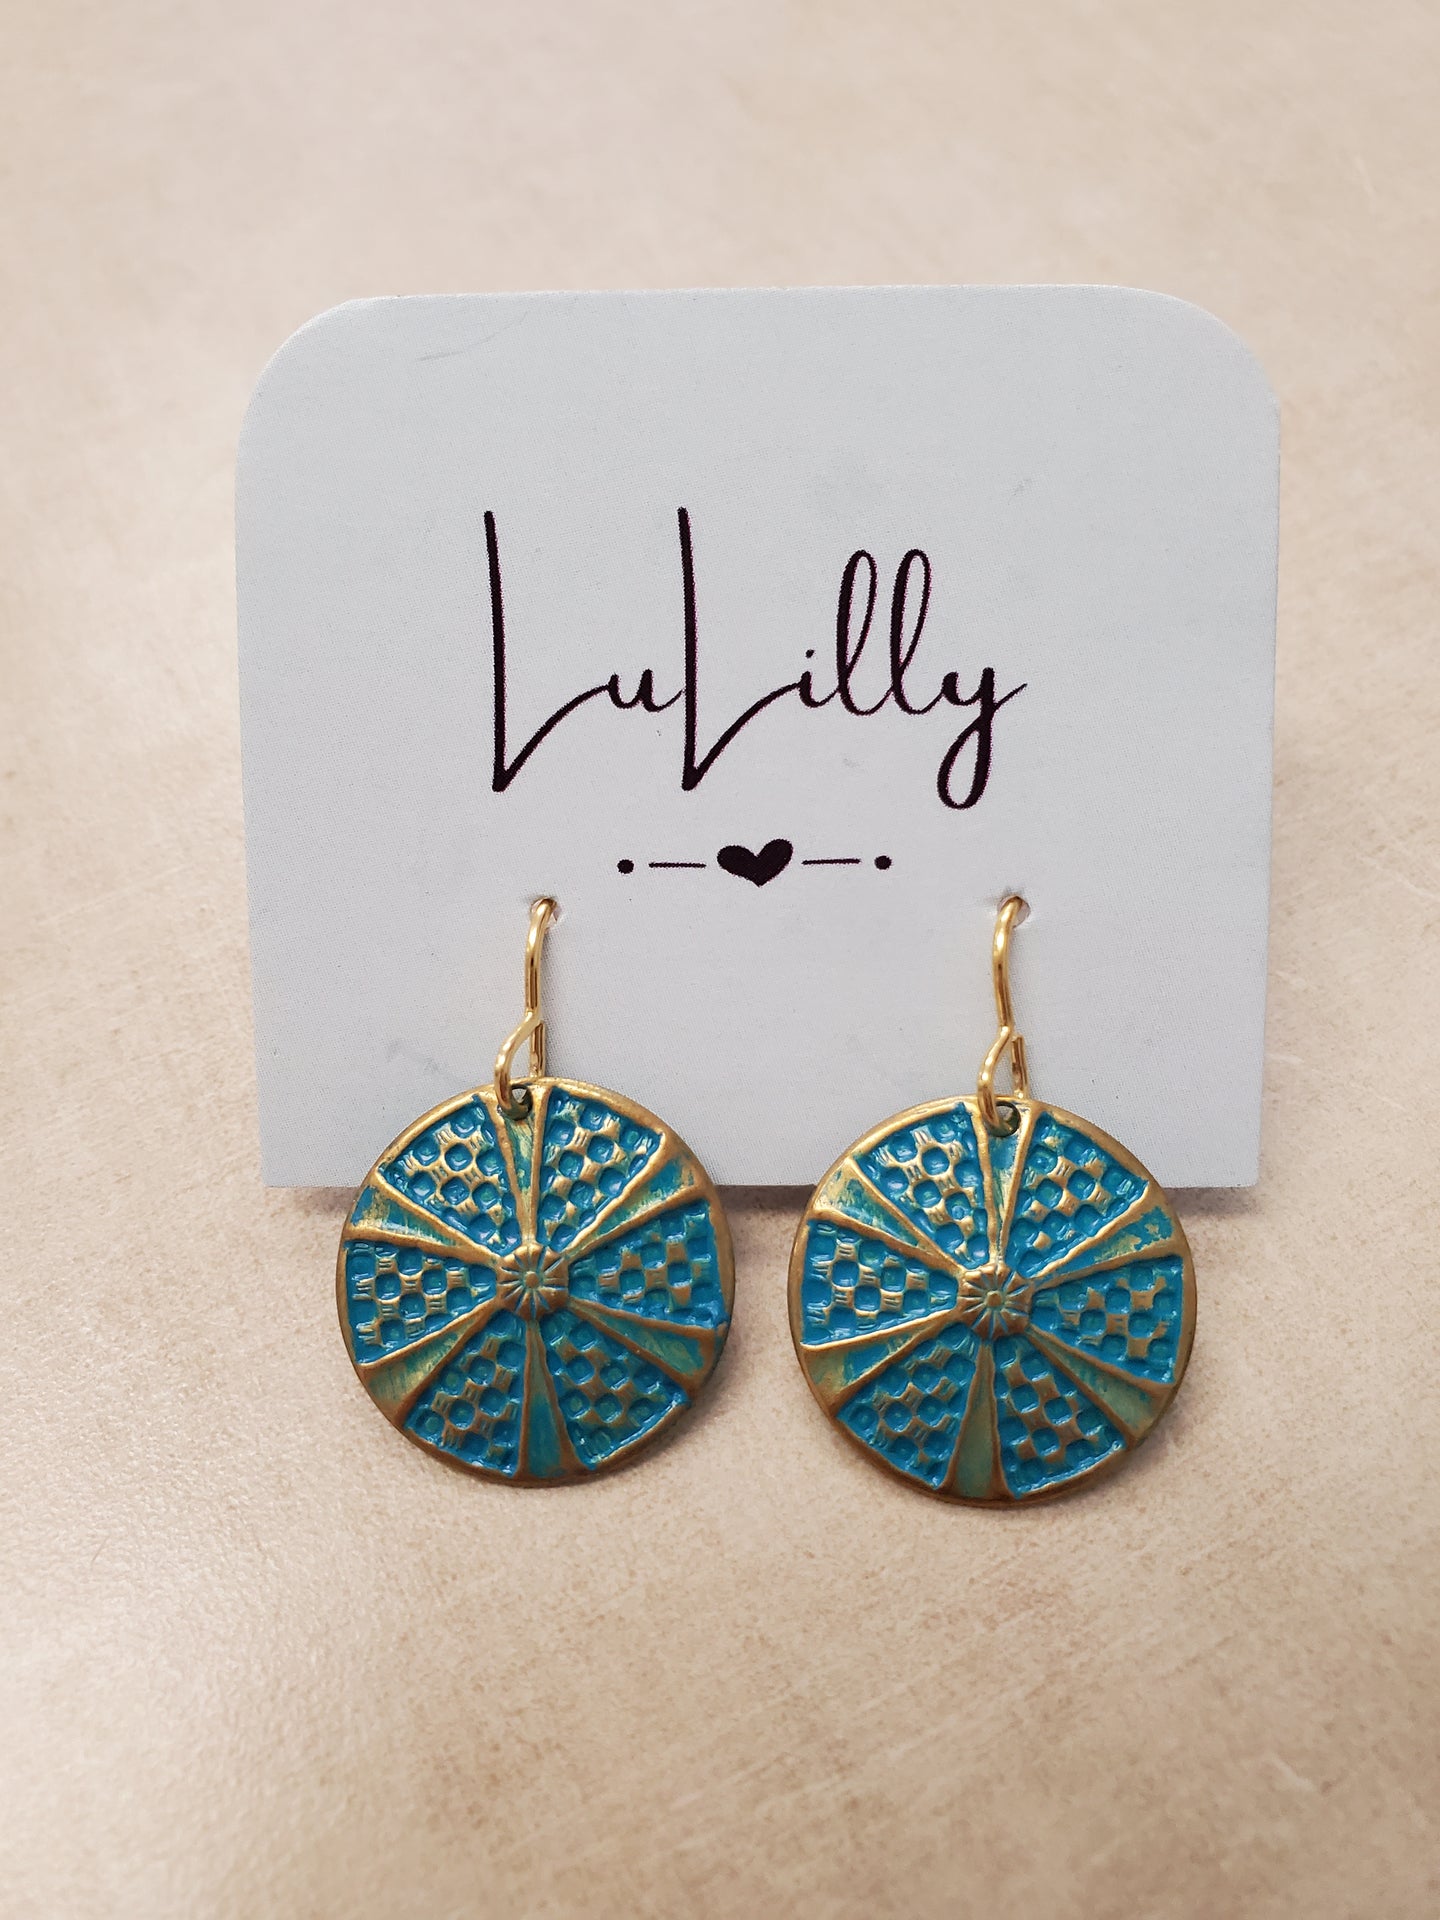 Teal and Gold Round Pendant Earrings